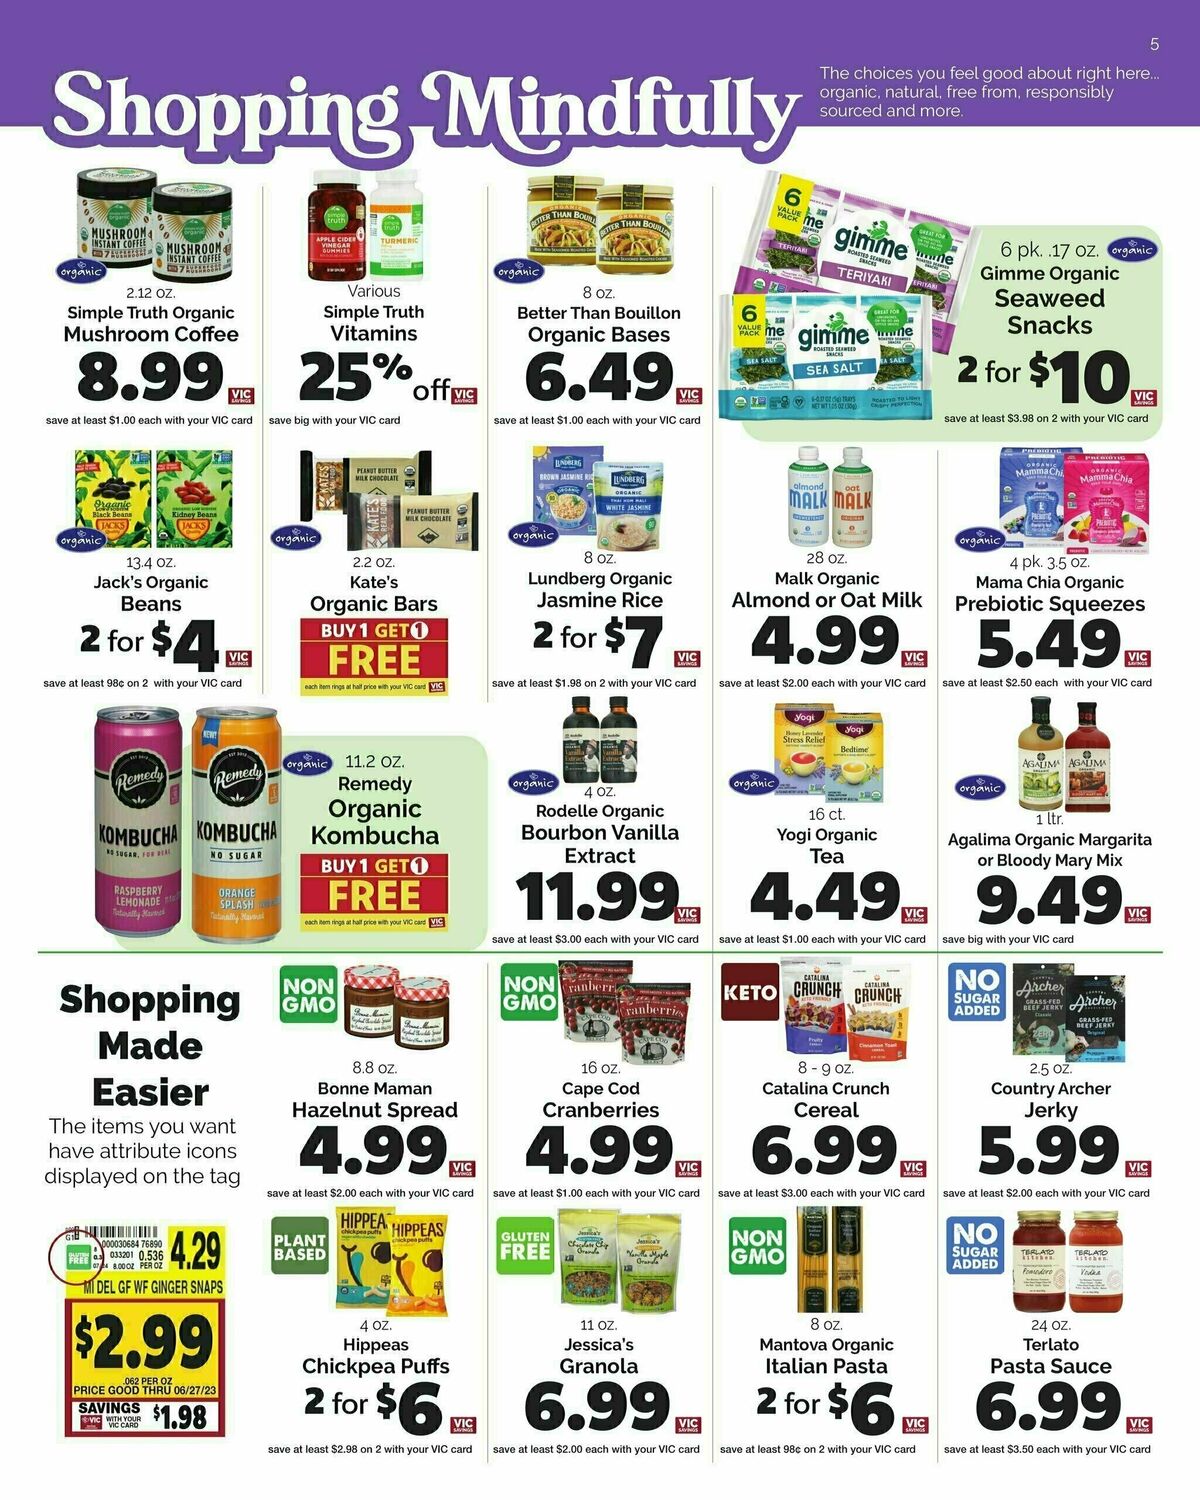 Harris Teeter Discovery - April Weekly Ad from March 27